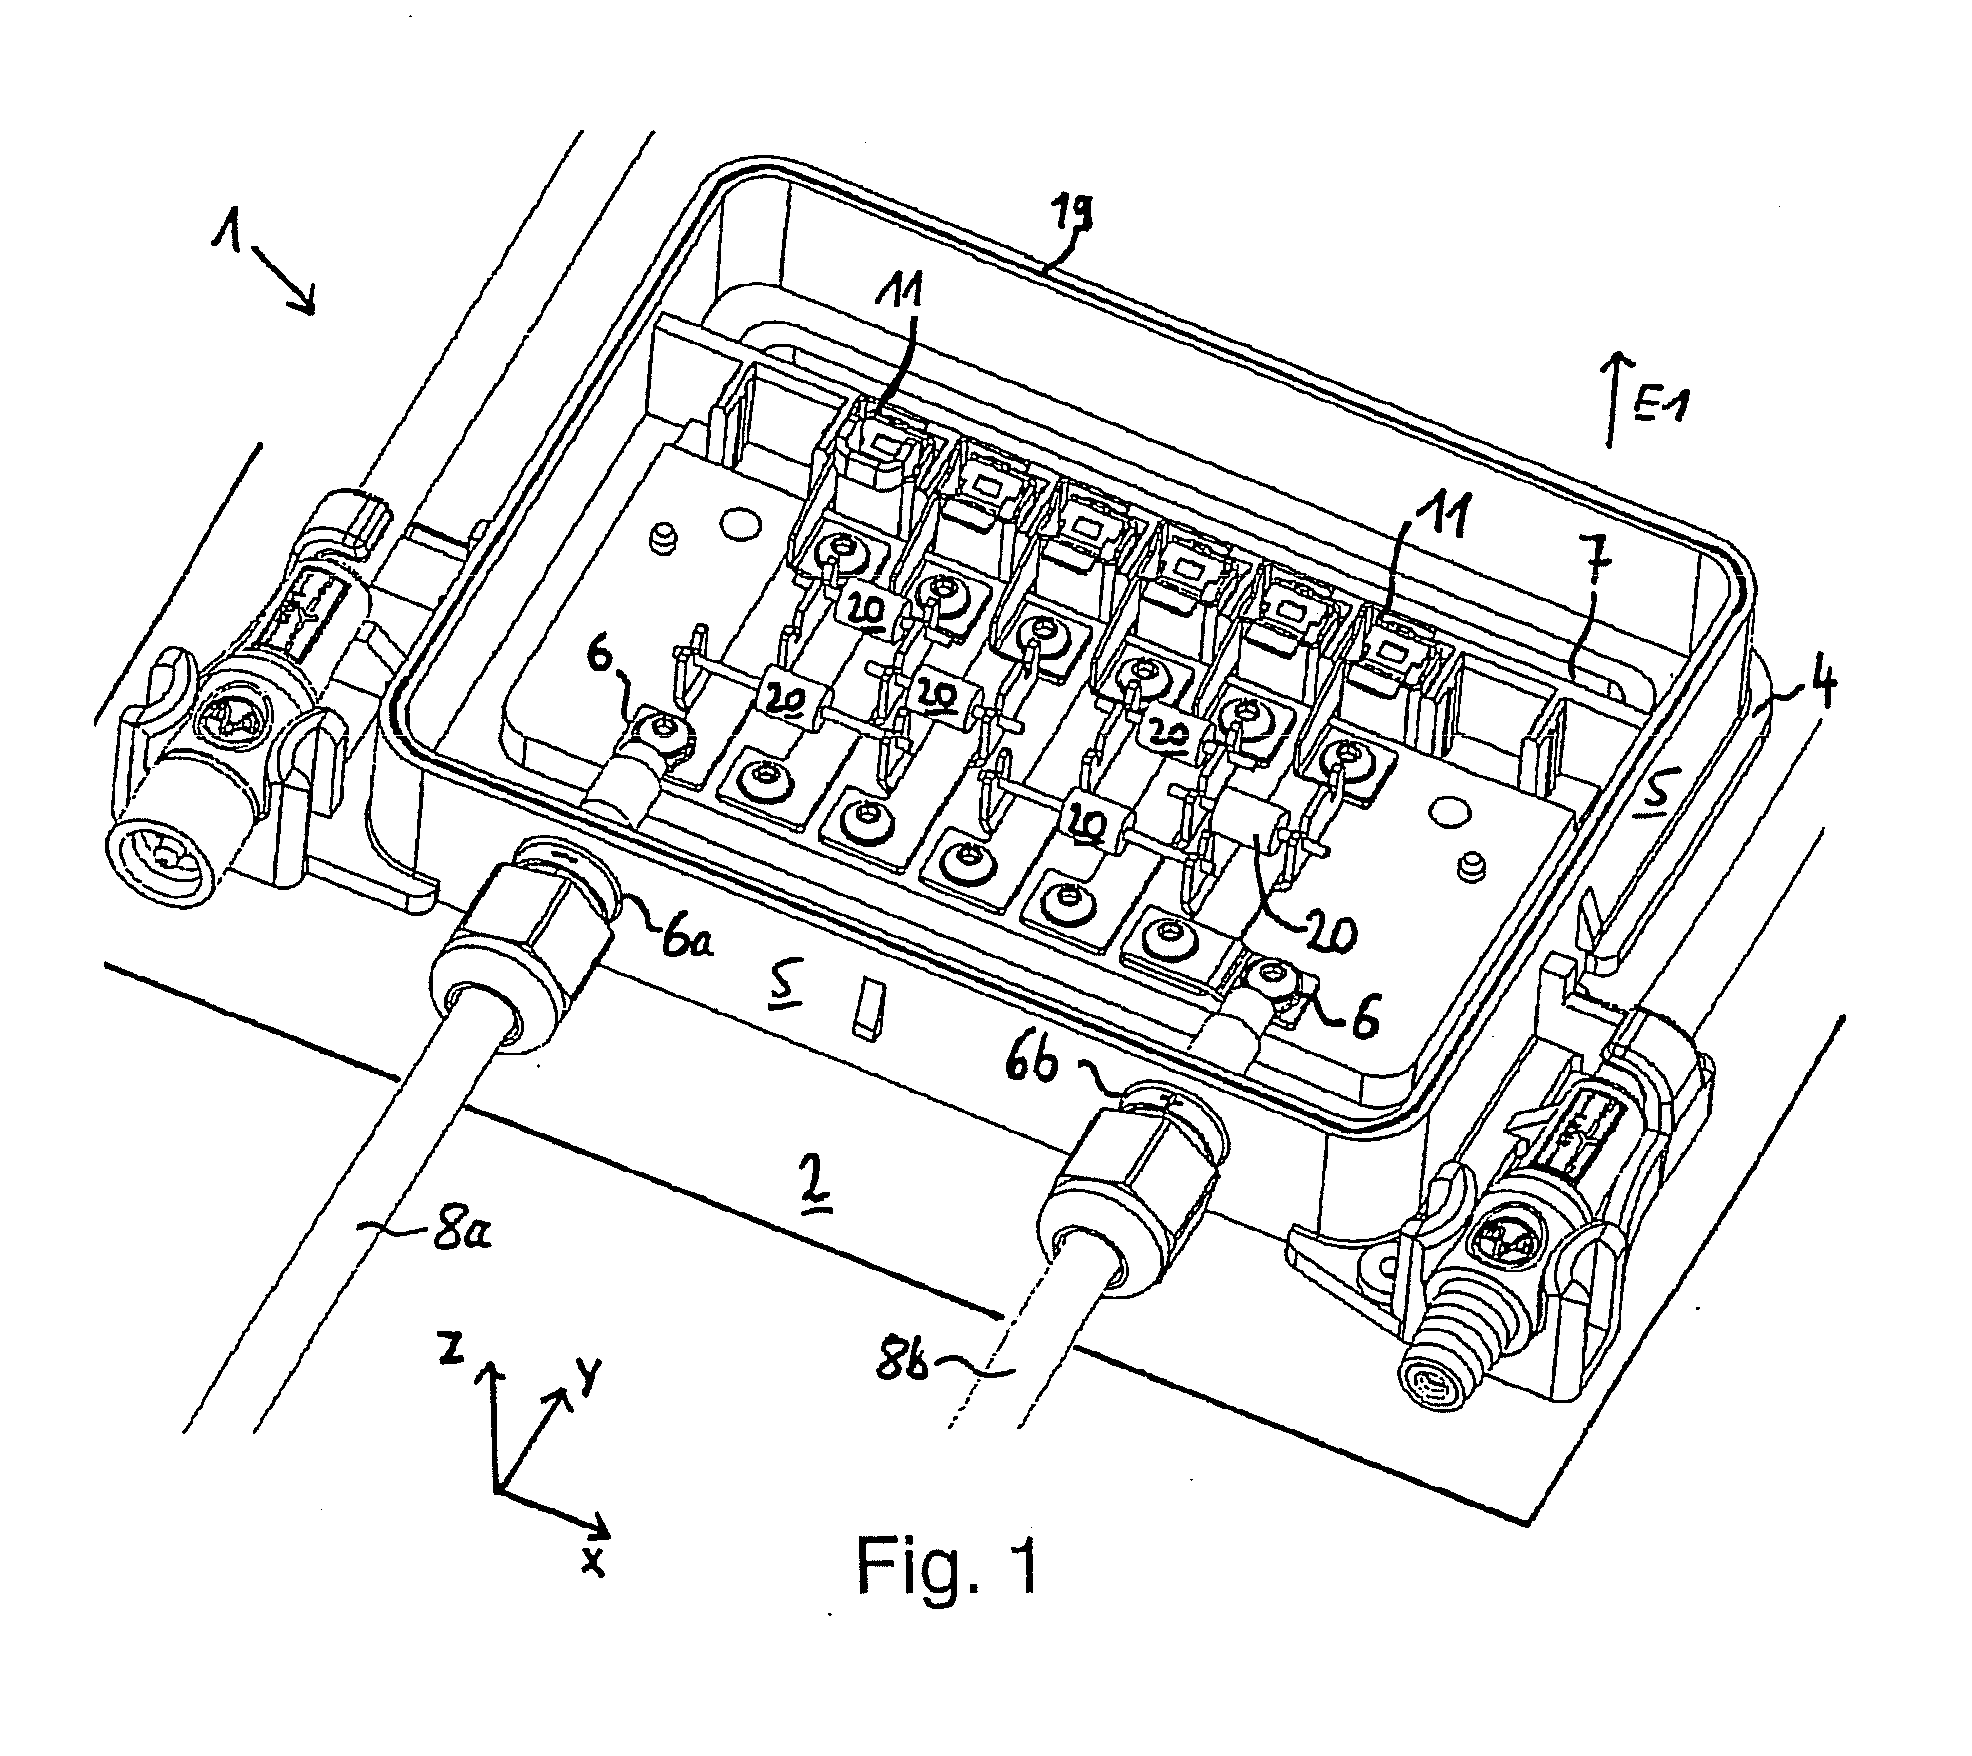 Junction box, use, solar panel, contact element, and method